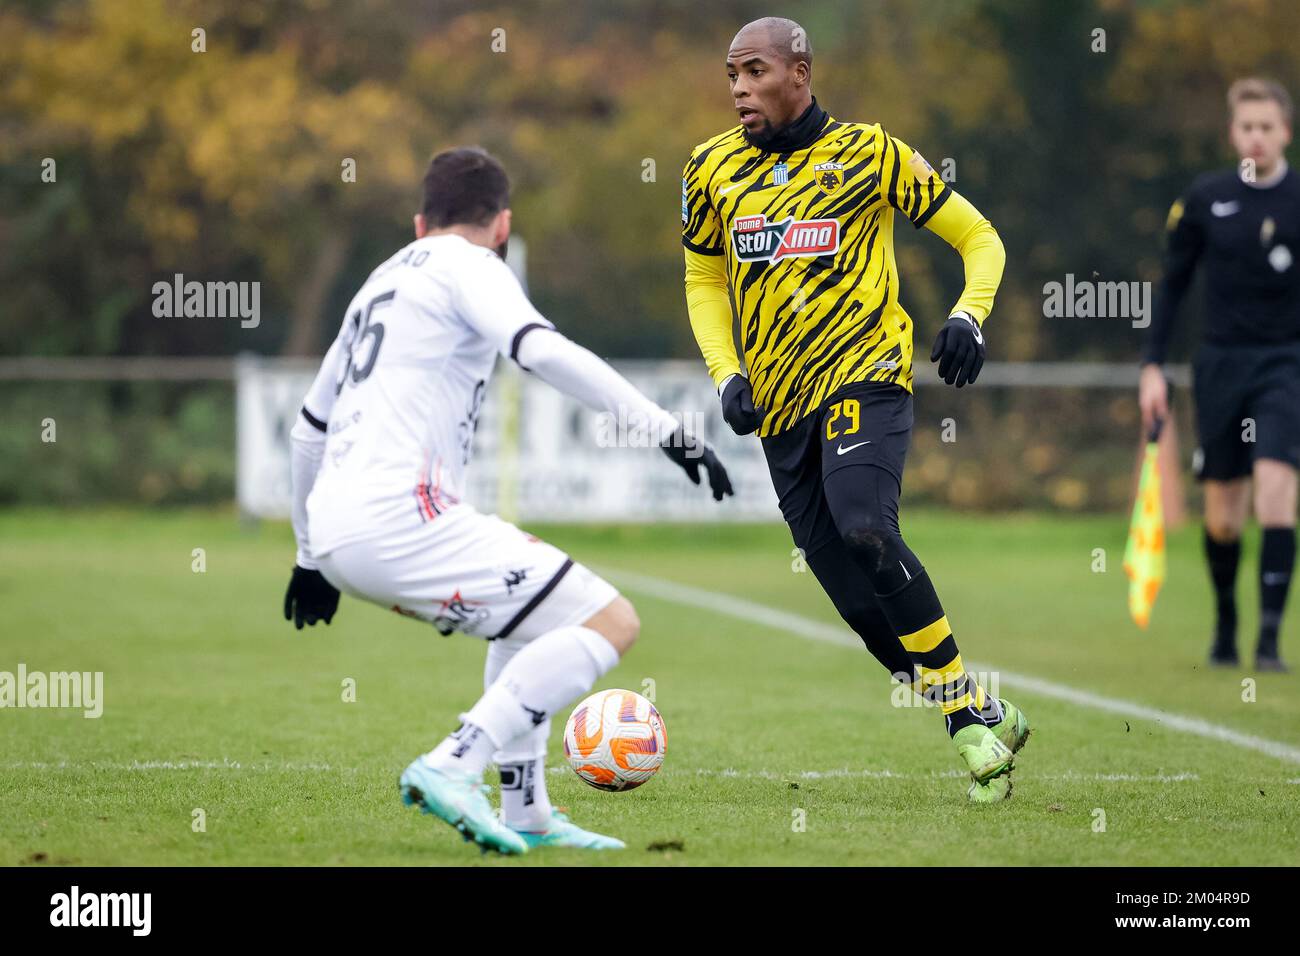 BURGH-HAAMSTEDE, NETHERLANDS - DECEMBER 4: Djibril Sidibe of AEK Athens during the Friendly match between AEK Athens and RFC Seraing at Sportpark van Zuijen on December 4, 2022 in Burgh-Haamstede, Netherlands (Photo by Broer van den Boom/Orange Pictures) Stock Photo